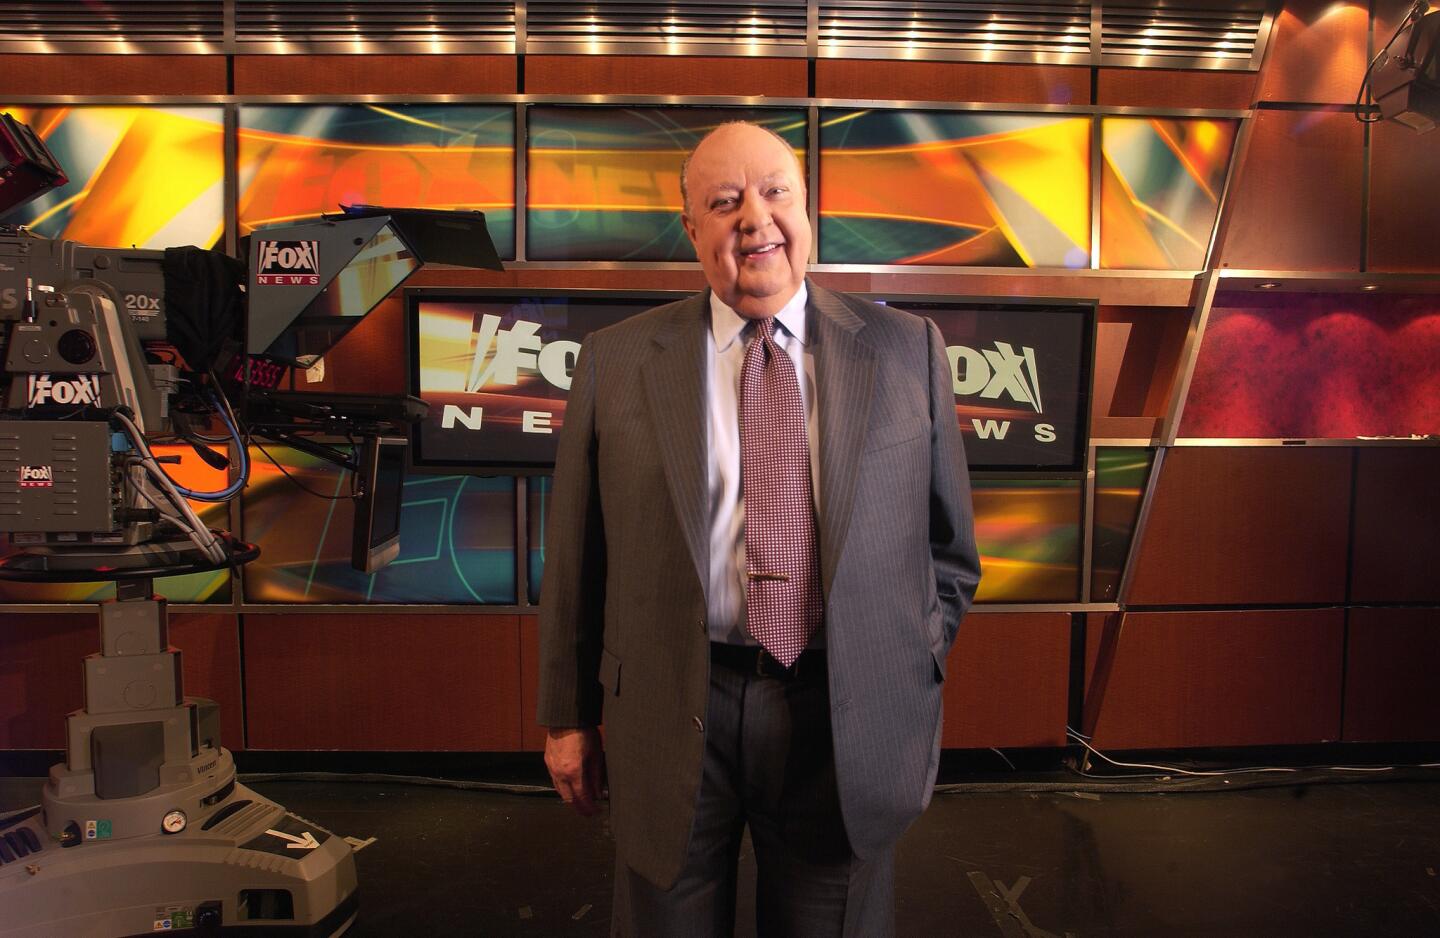 Former Fox News chief Roger Ailes, shown on the Fox News set, died on Thursday. He was 77.